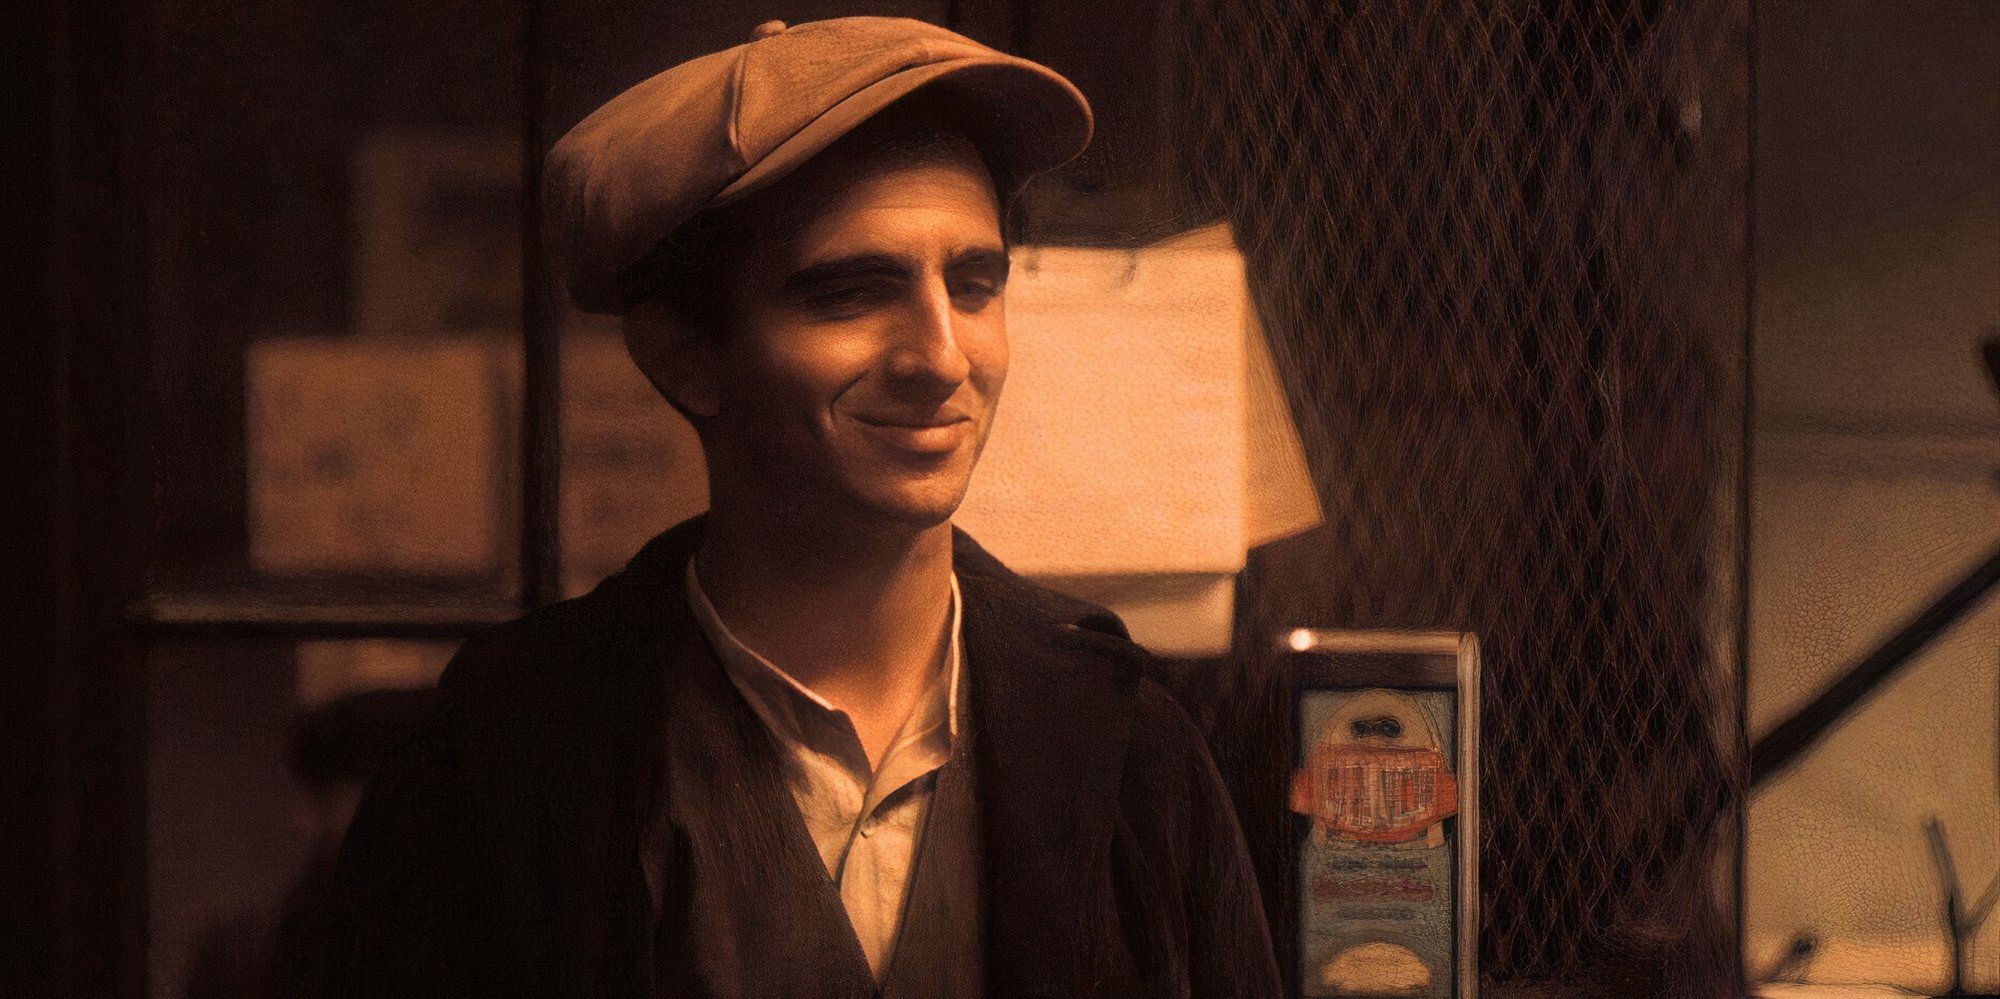 Genco Abbandando smiling at someone off-camera in The Godfather: Part II (1974)